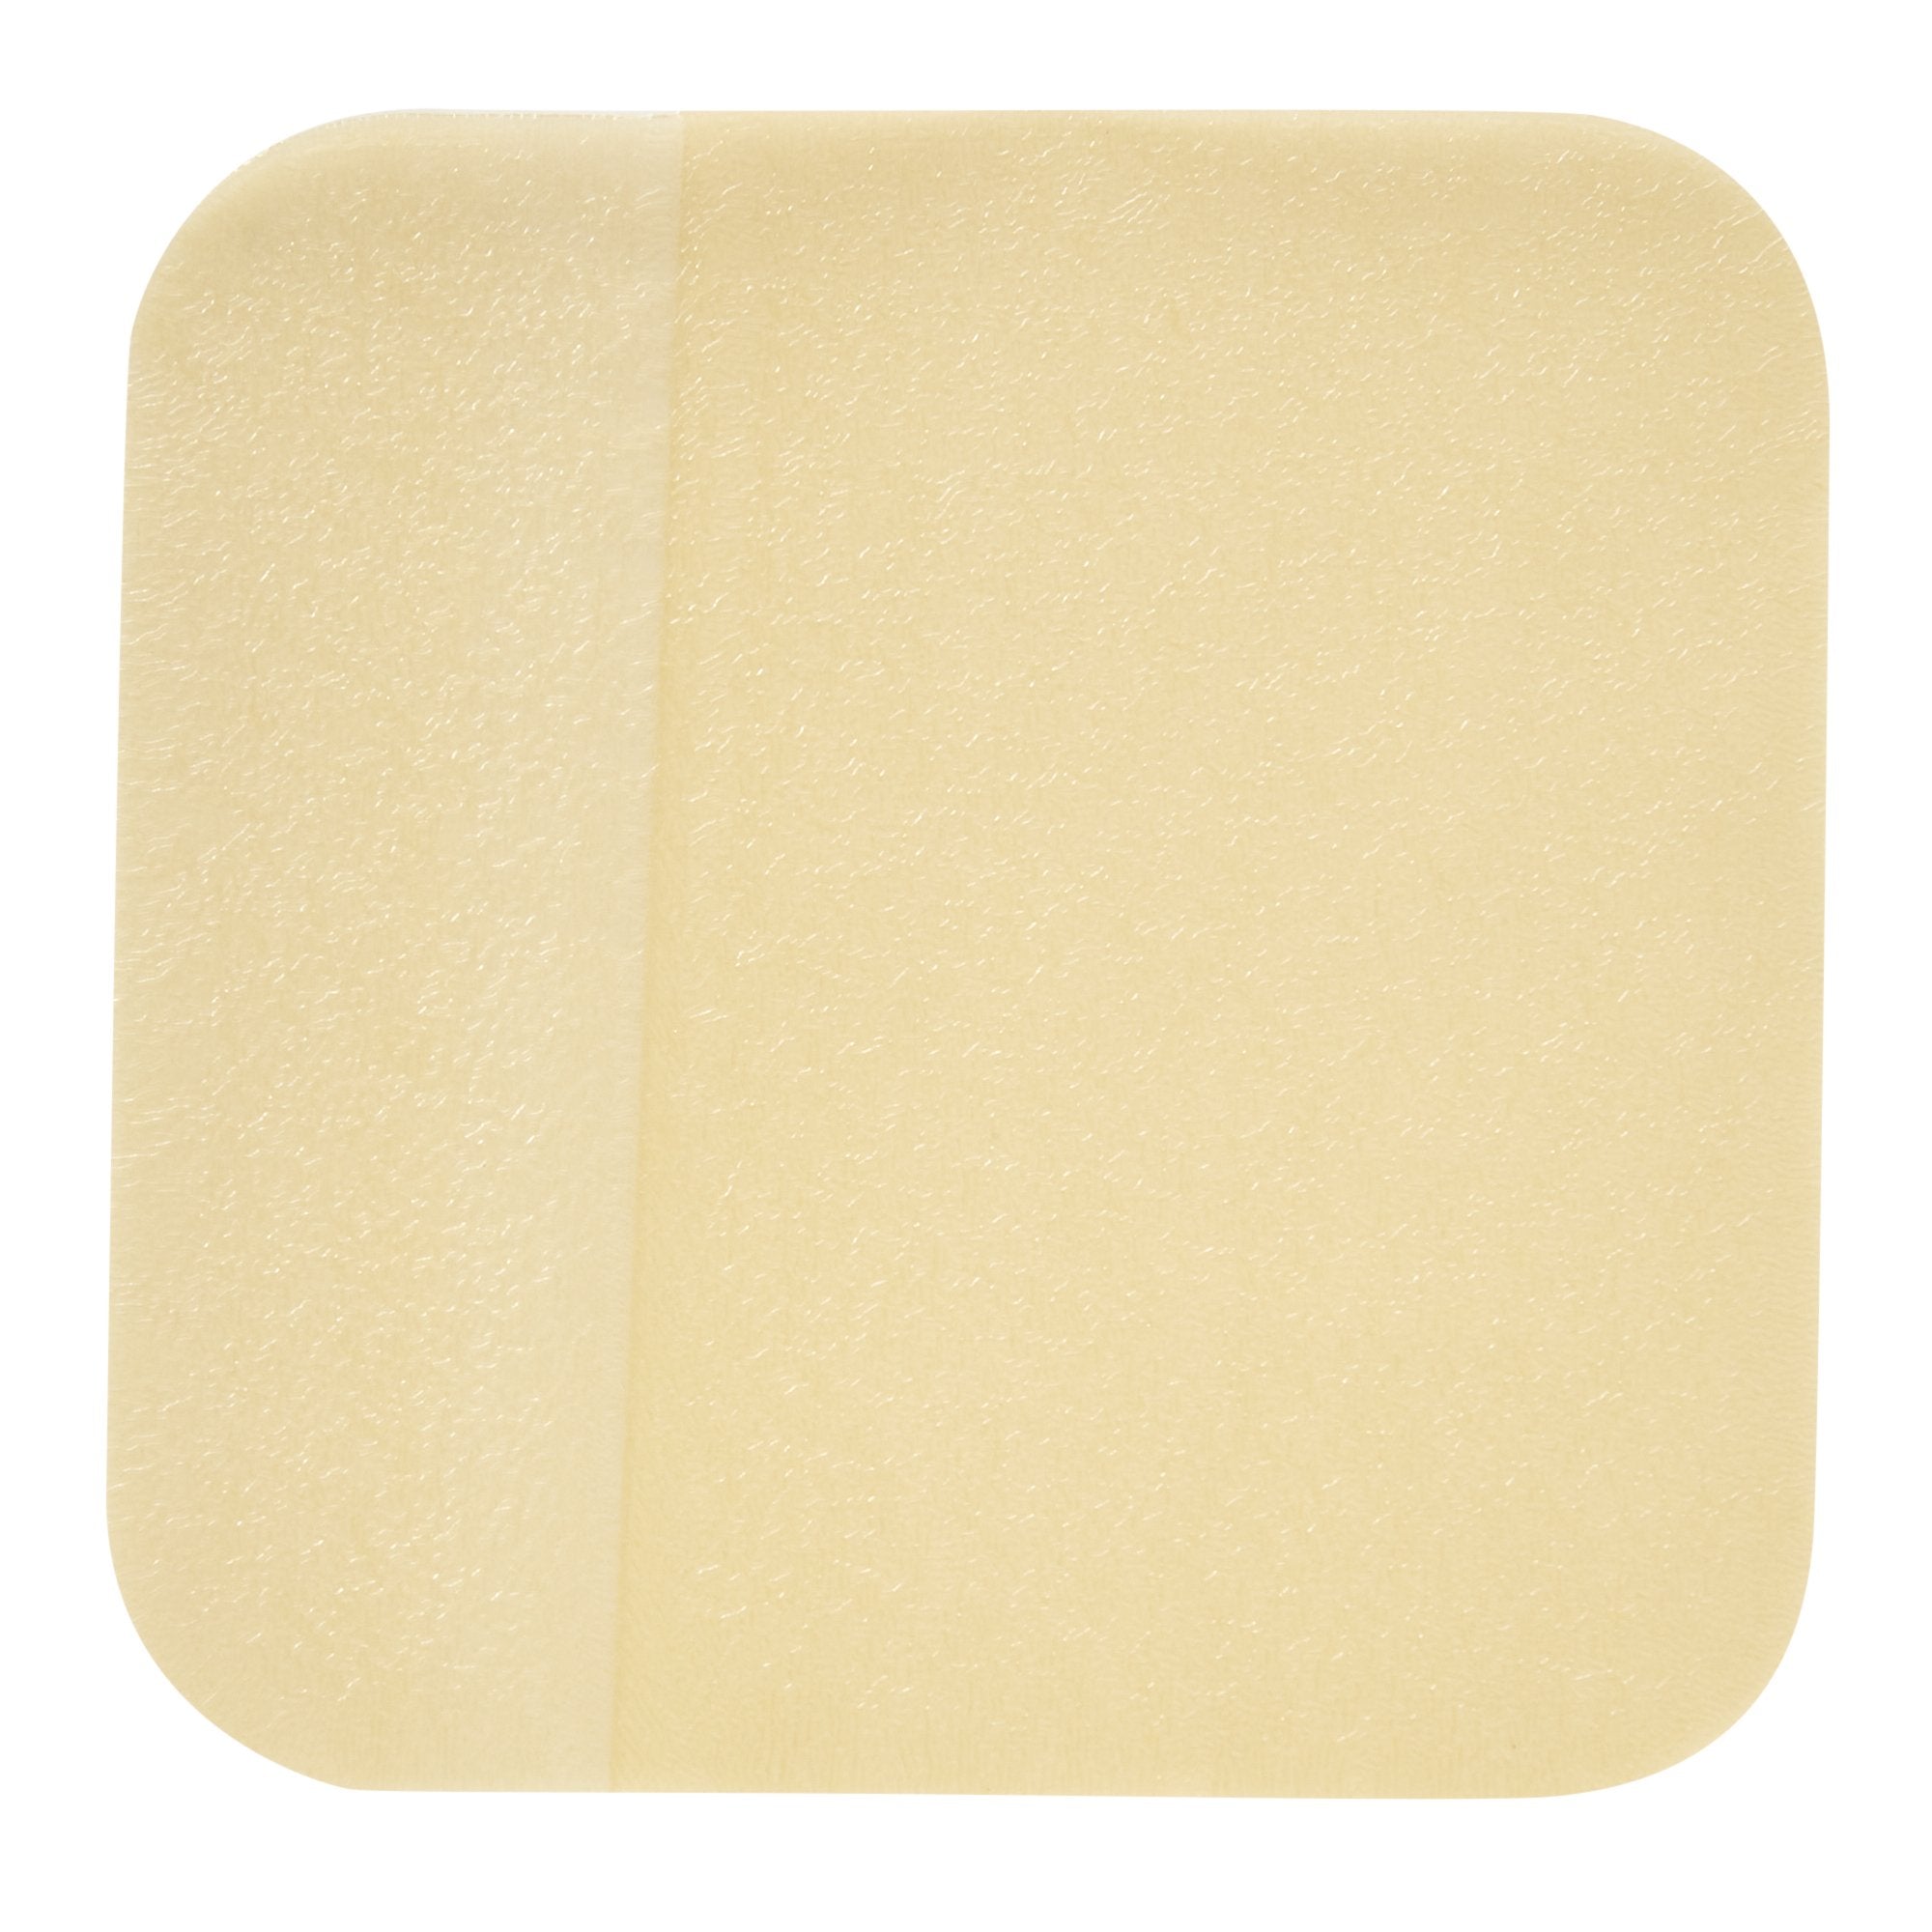 Convatec DuoDERM® Extra Thin Hydrocolloid Dressing - 6 X 6 Inch Square - Sterile Adhesive Wound Care